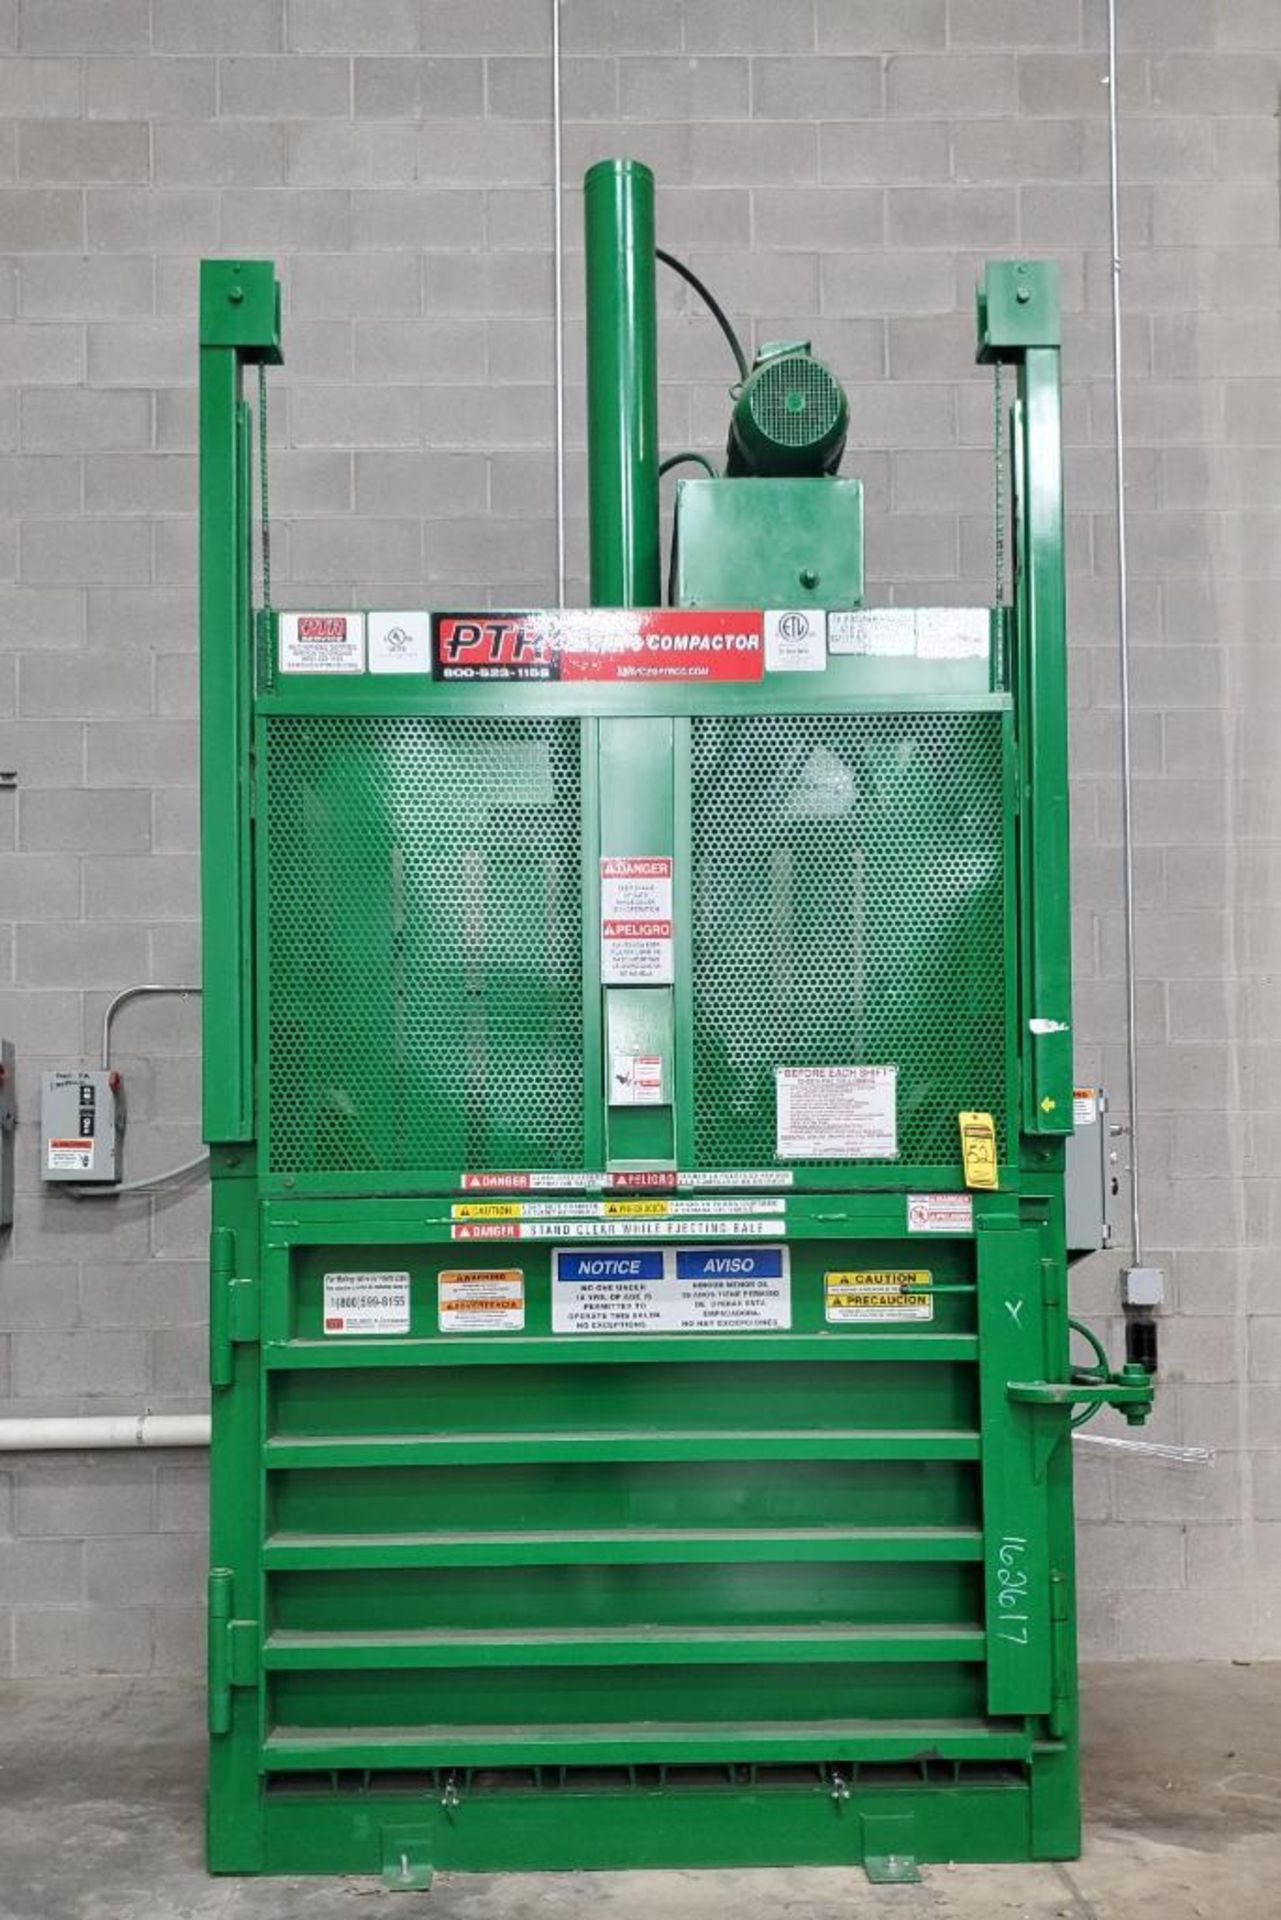 2016 PTR BALER & COMPACTOR; MODEL 3400HD, S/N 162617, 3-PHASE, 460-VOLTS, 60-HZ ***LOCATED AT